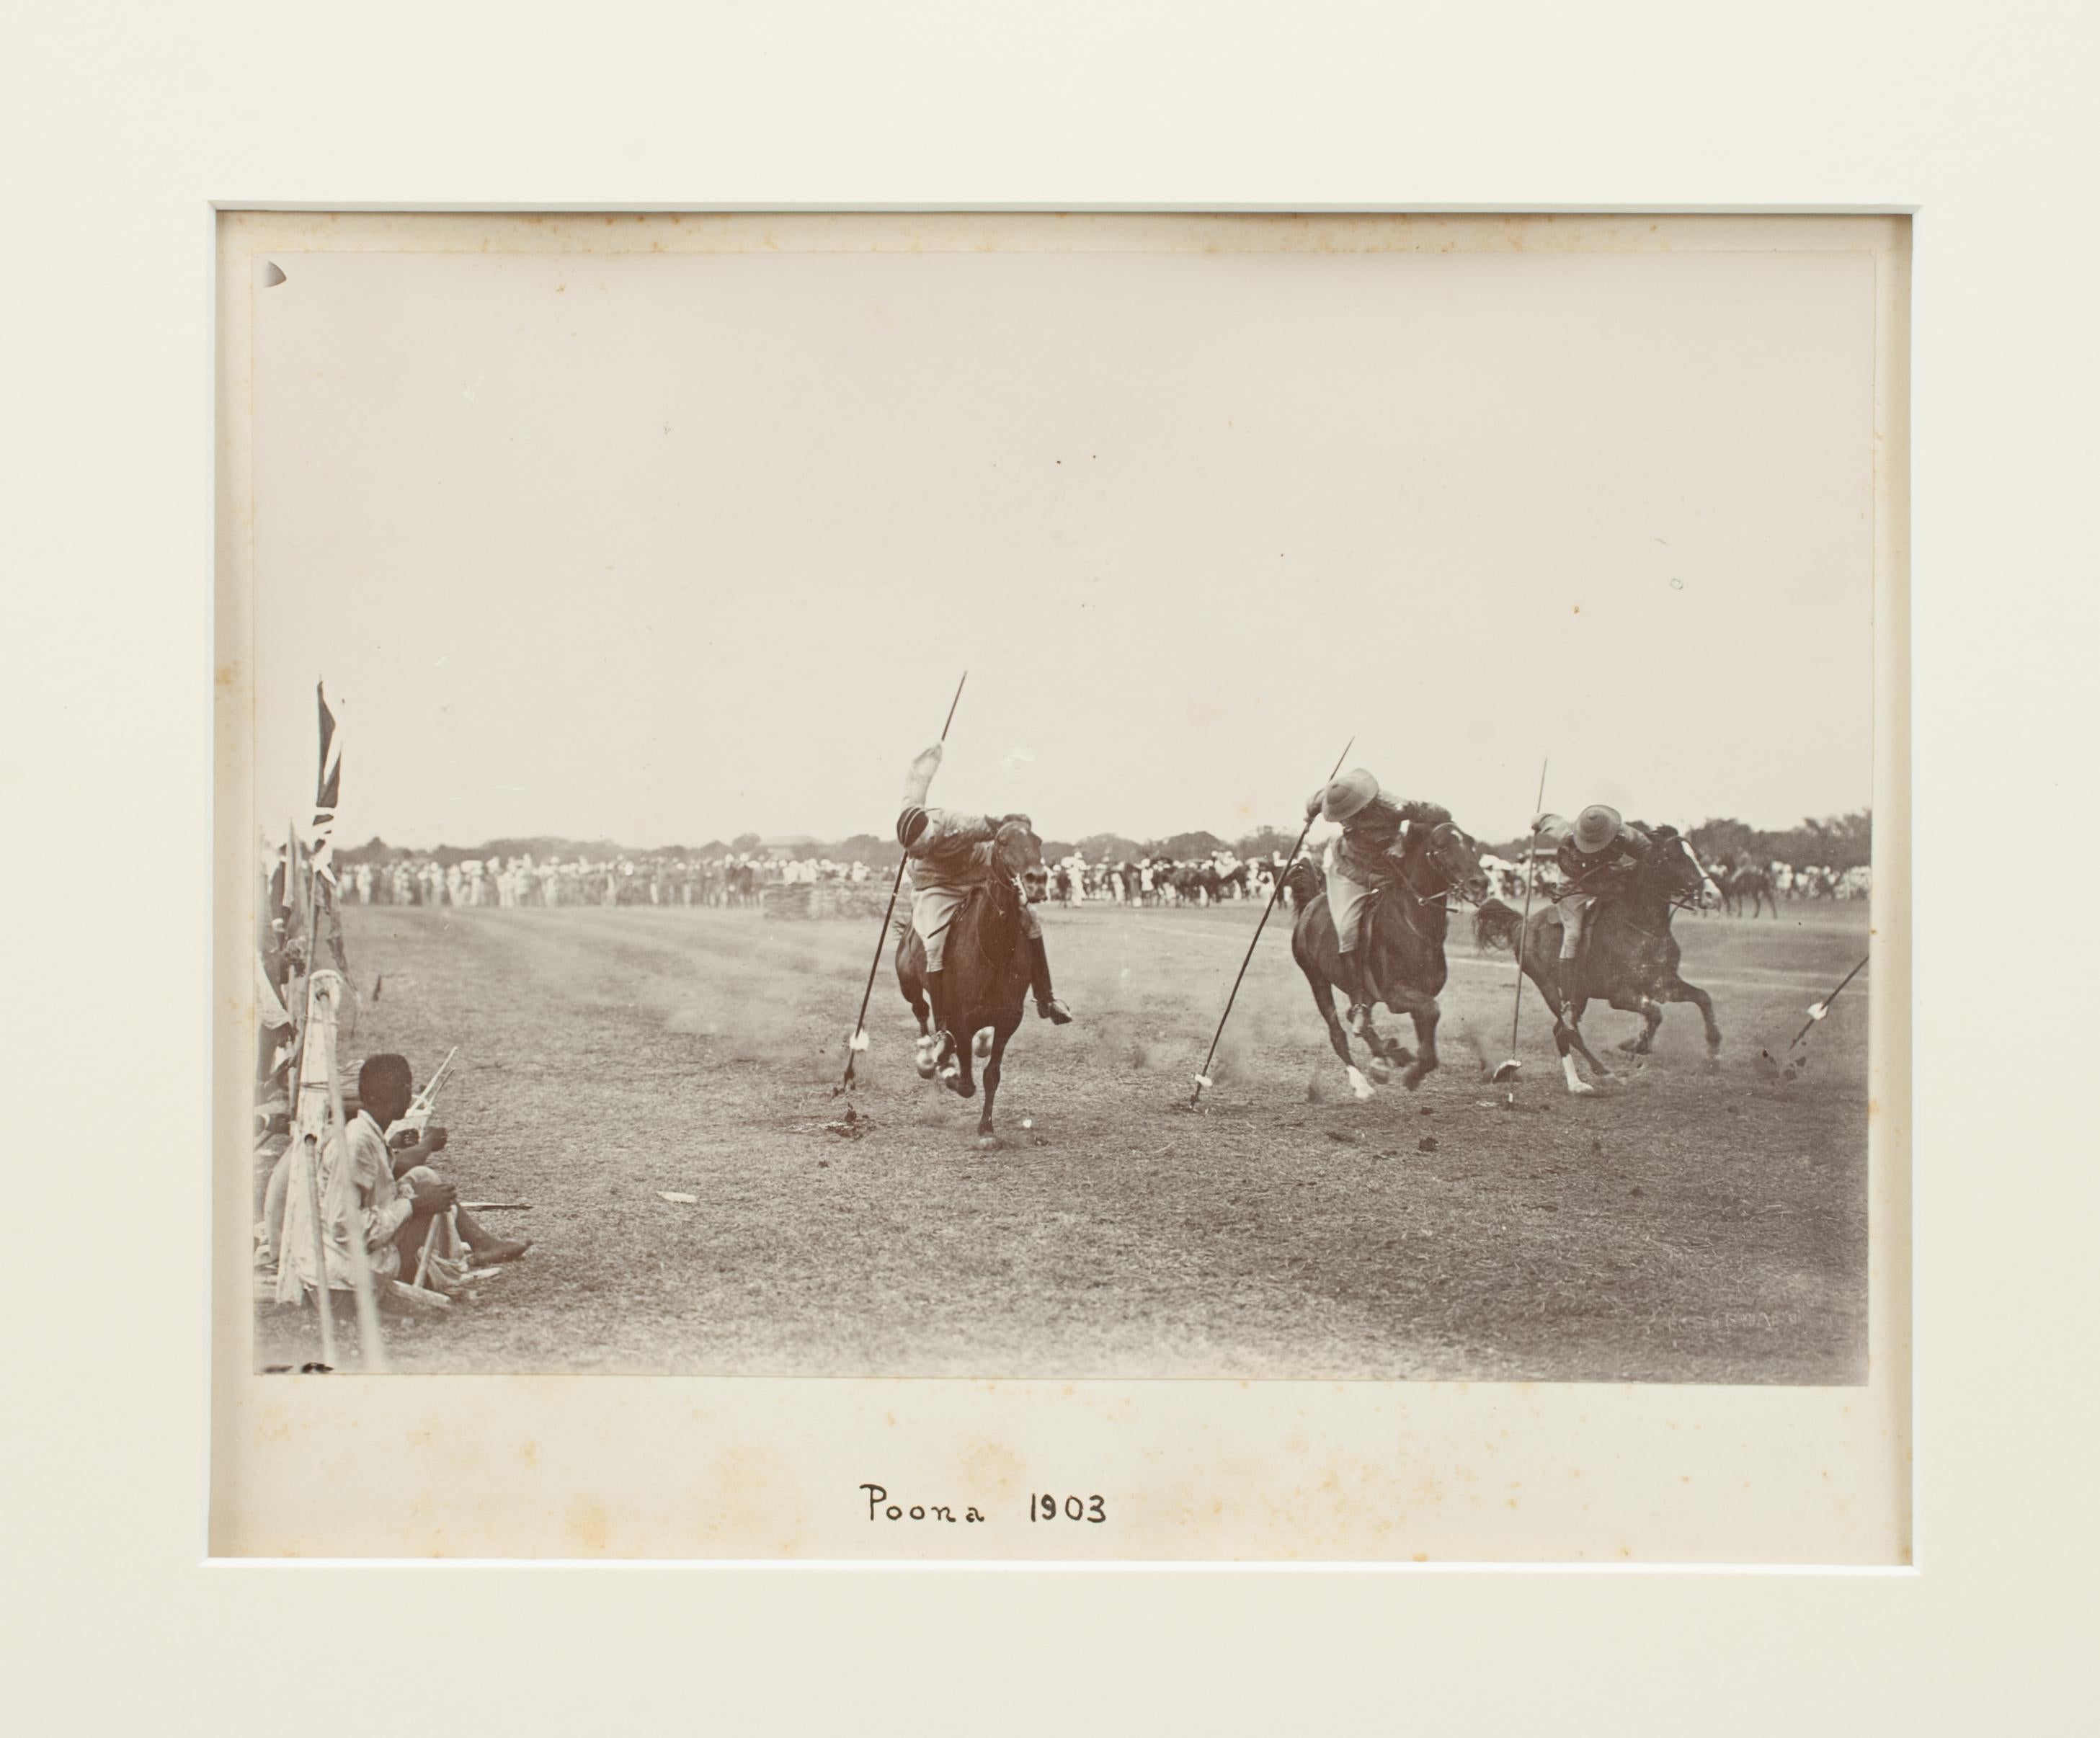 Colonial Tent Pegging Photograph, Poona 1903.
Rare sepia toned late Victorian Colonial photograph showing a group of horsemen 'Tent Pegging' with the caption 'Poona 1903'. The photo has been embossed 'Photographed by F.B. Stewart'. Stewart came